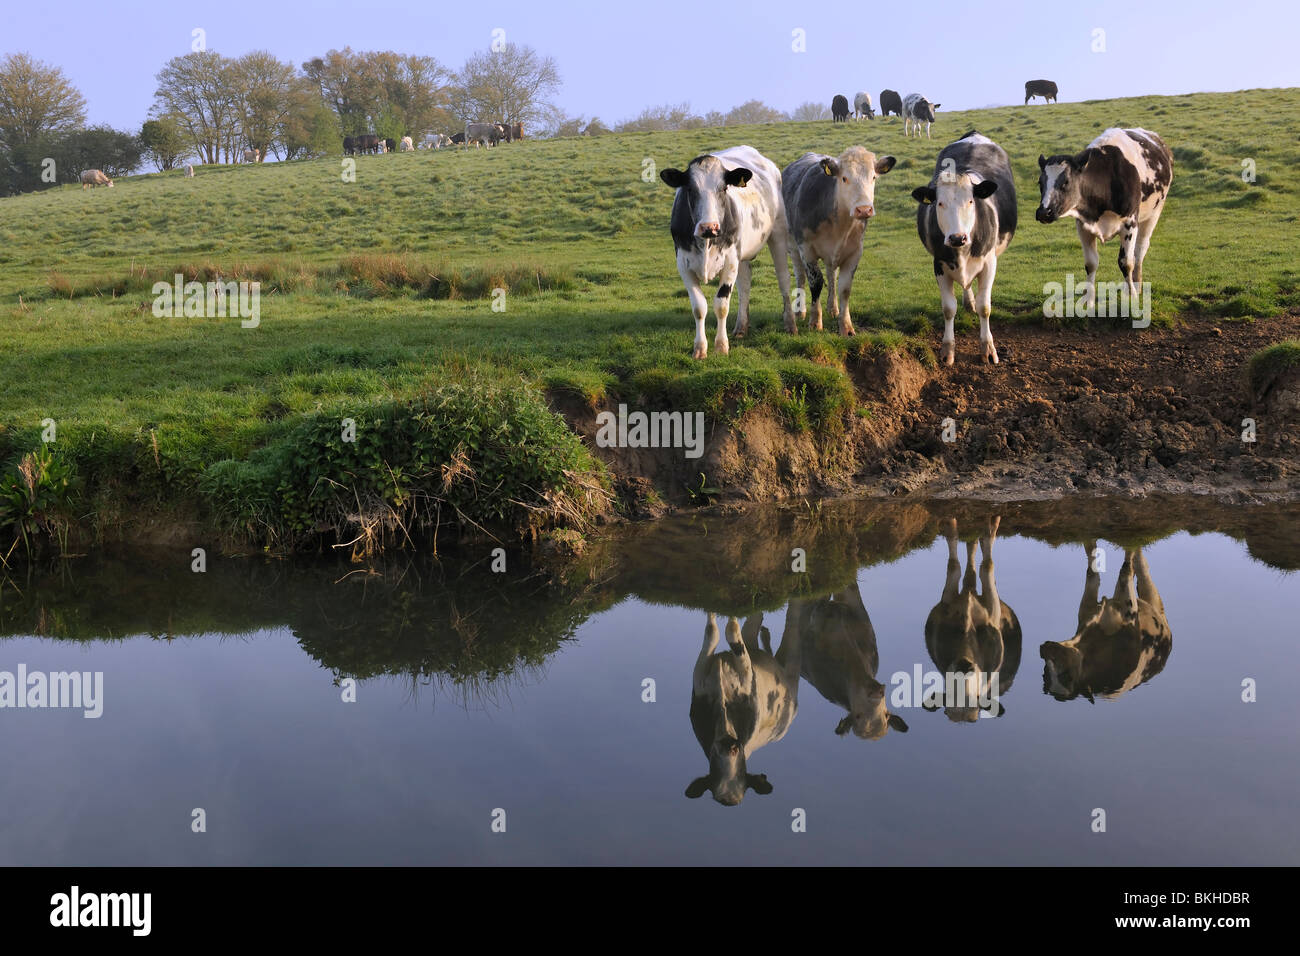 Livestock reflection - Cattle standing in a field next to the river Avon, Wiltshire. Stock Photo